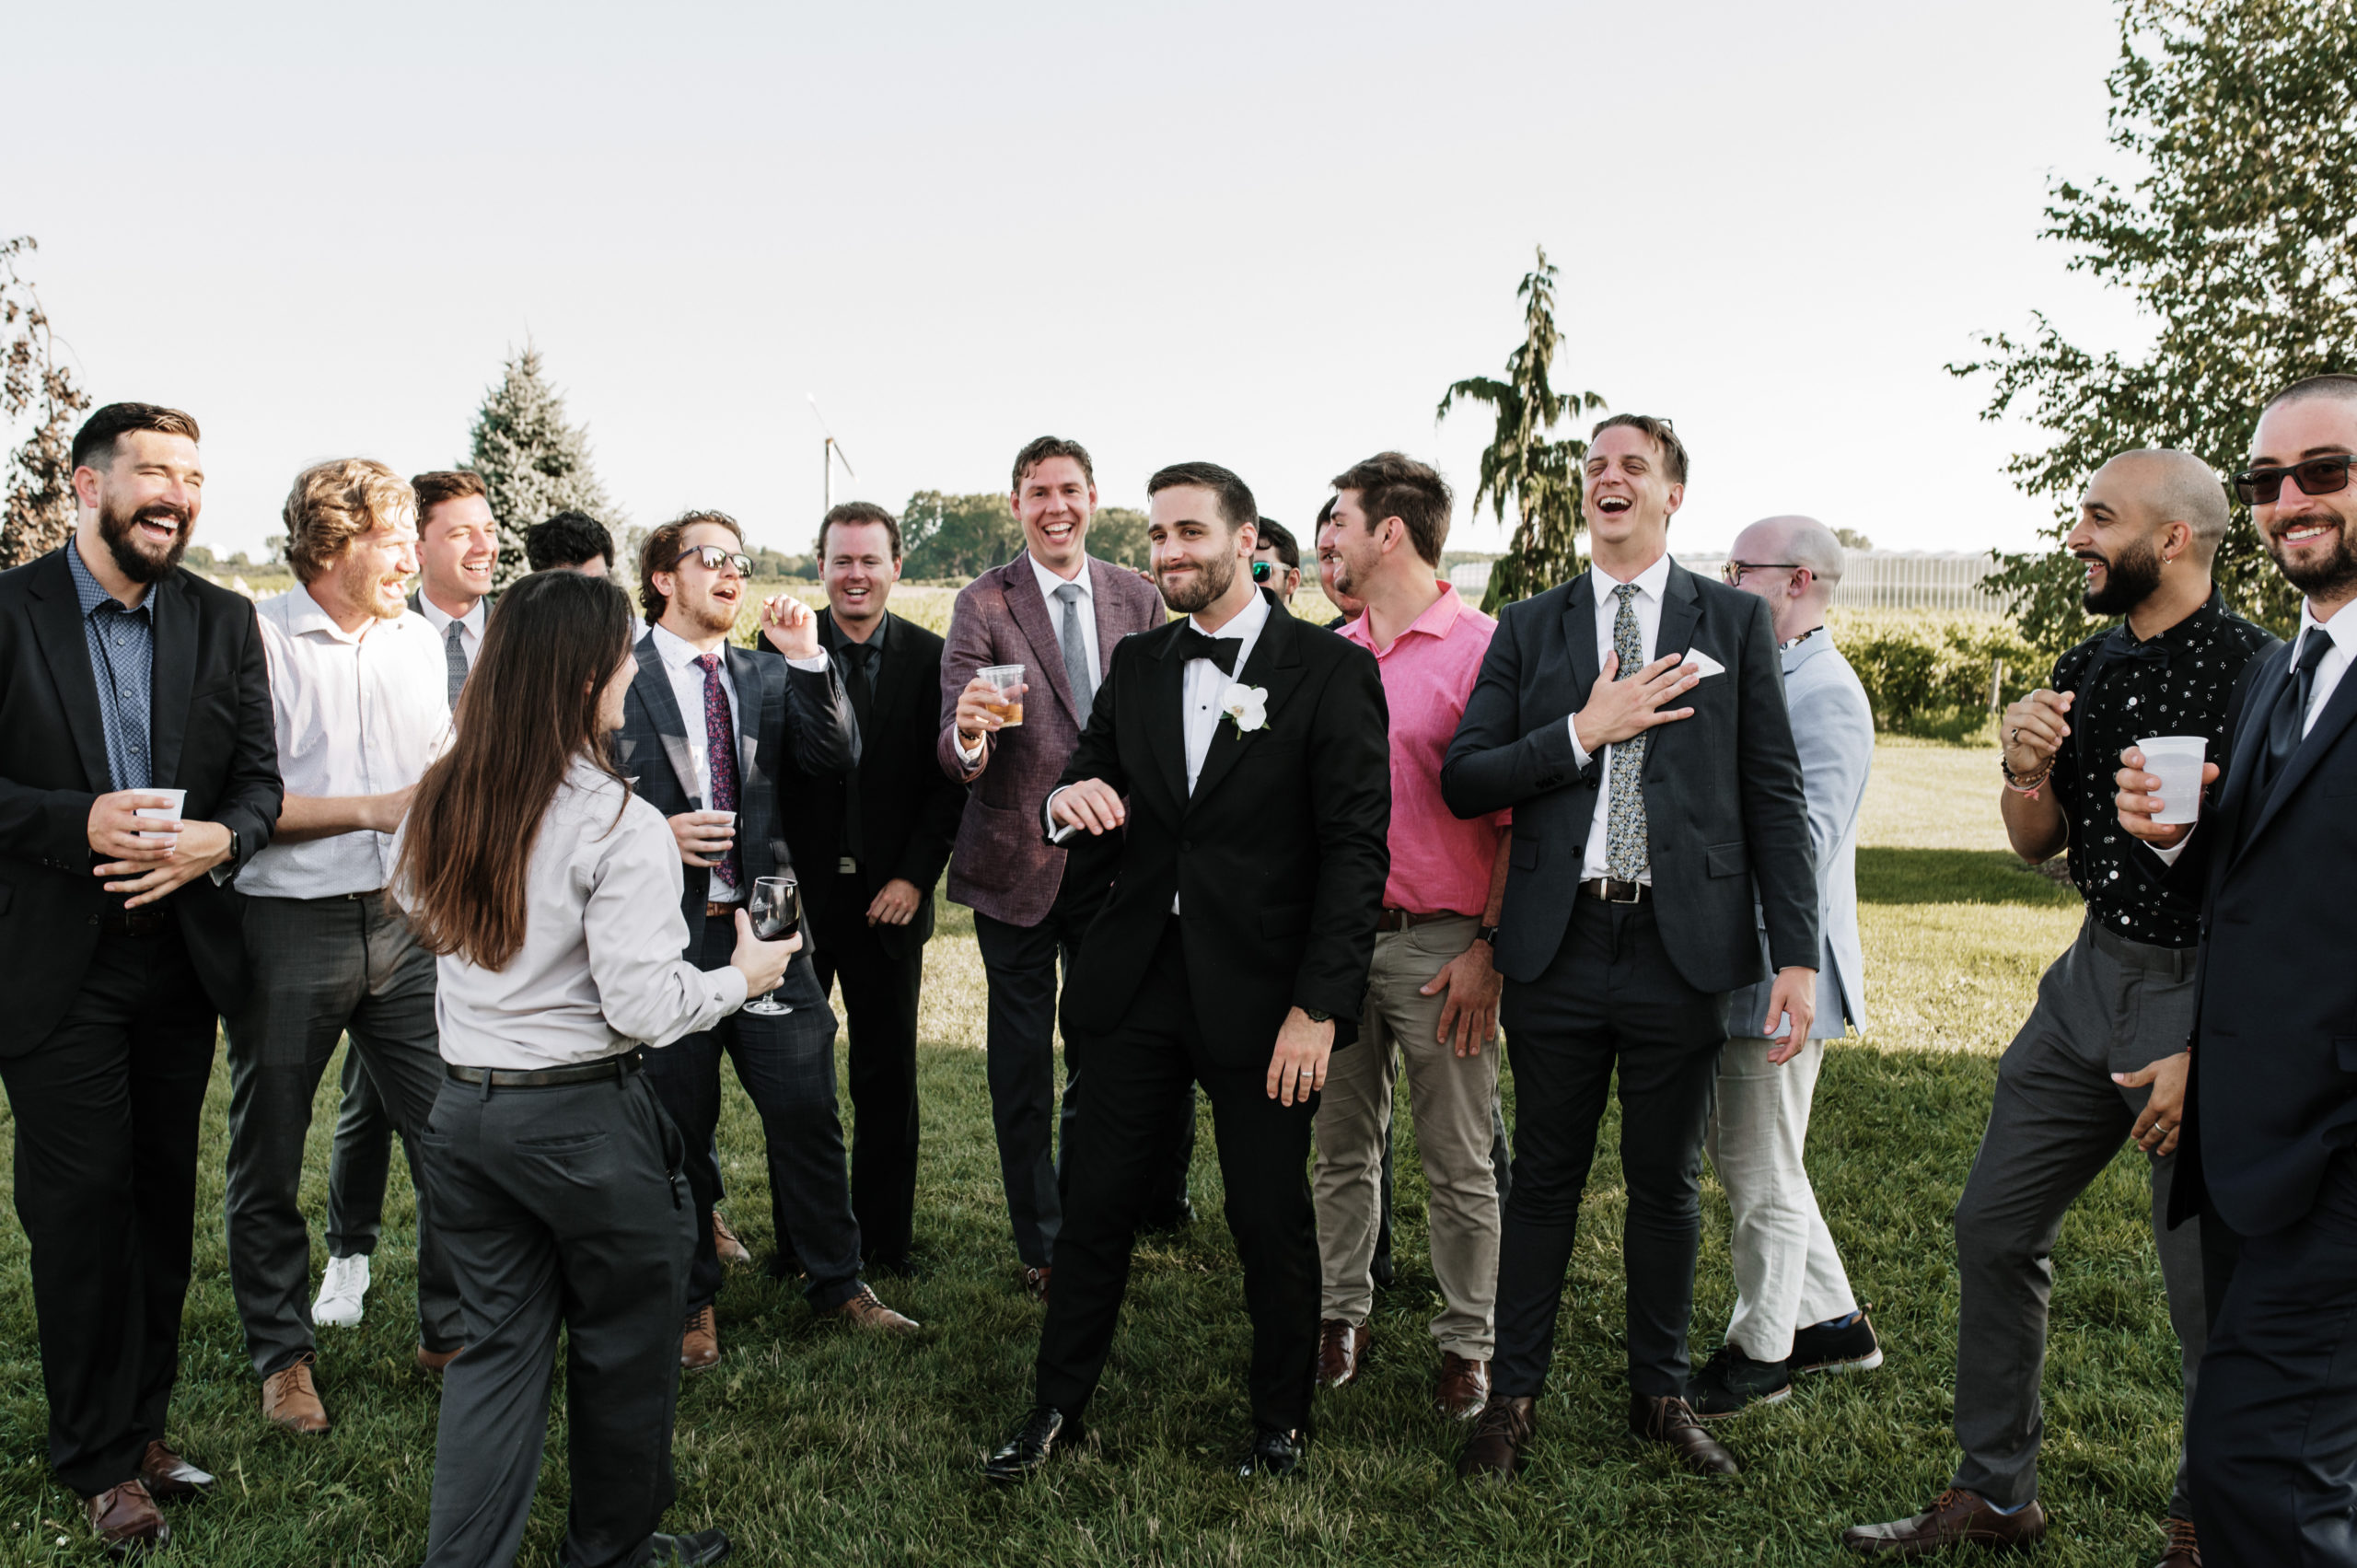 A groom celebrating his new marriage with his friends at his wedding